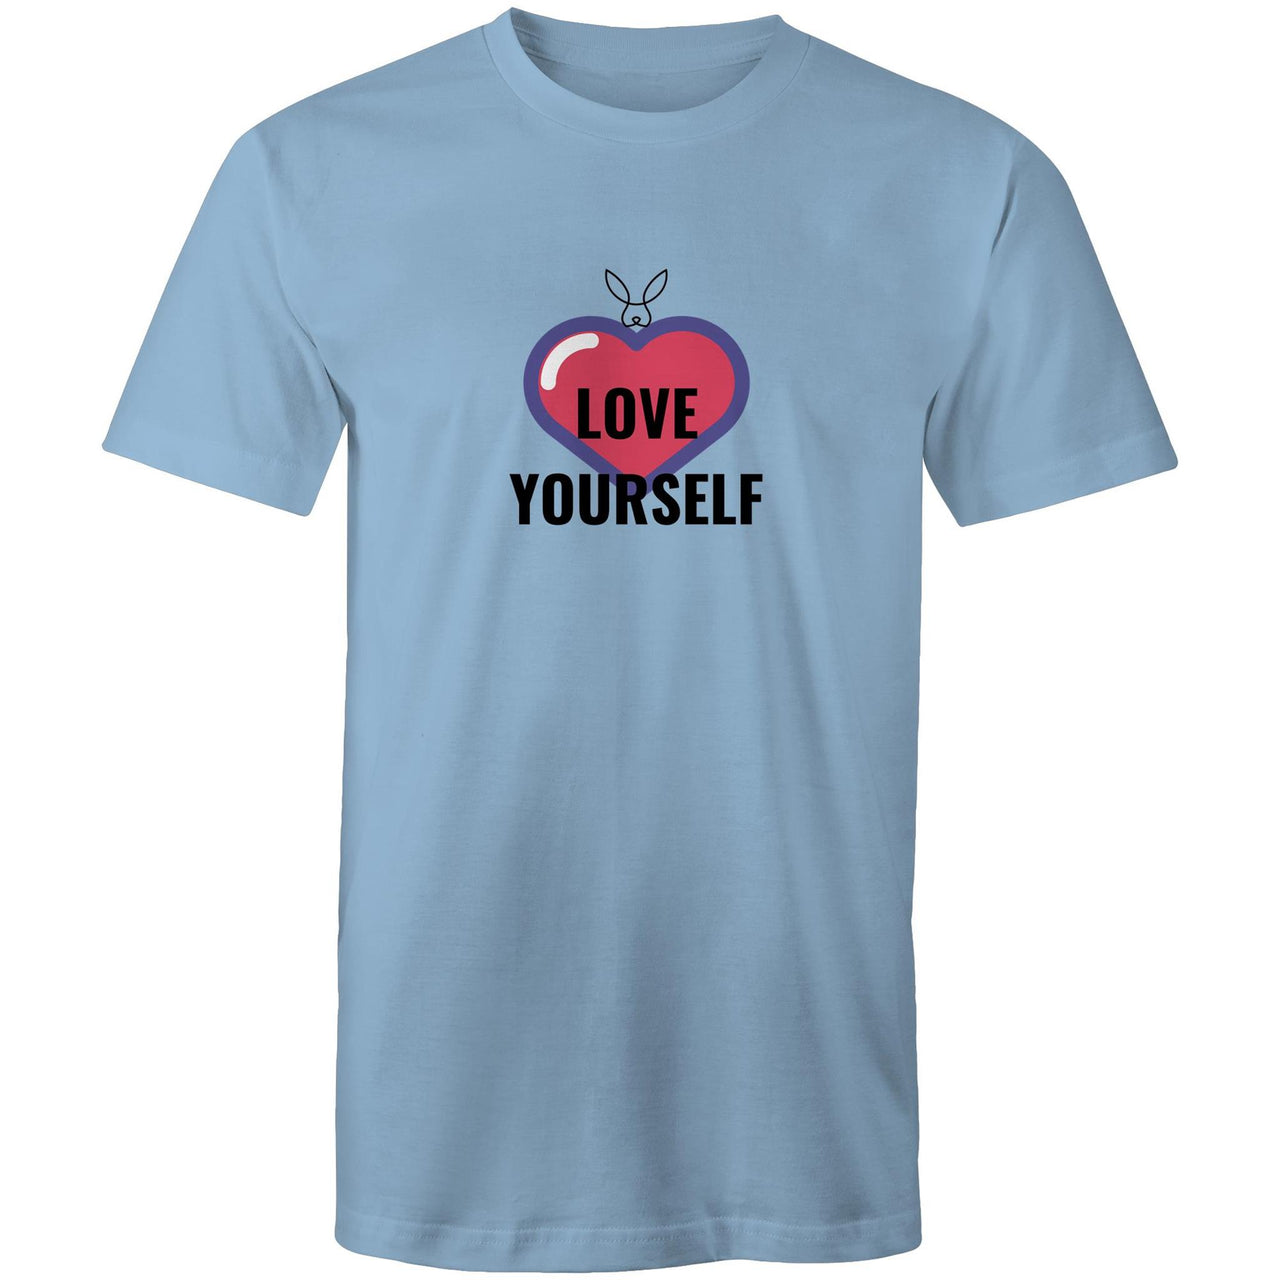 Love Yourself Crew T-Shirt by CBF Clothing Blue